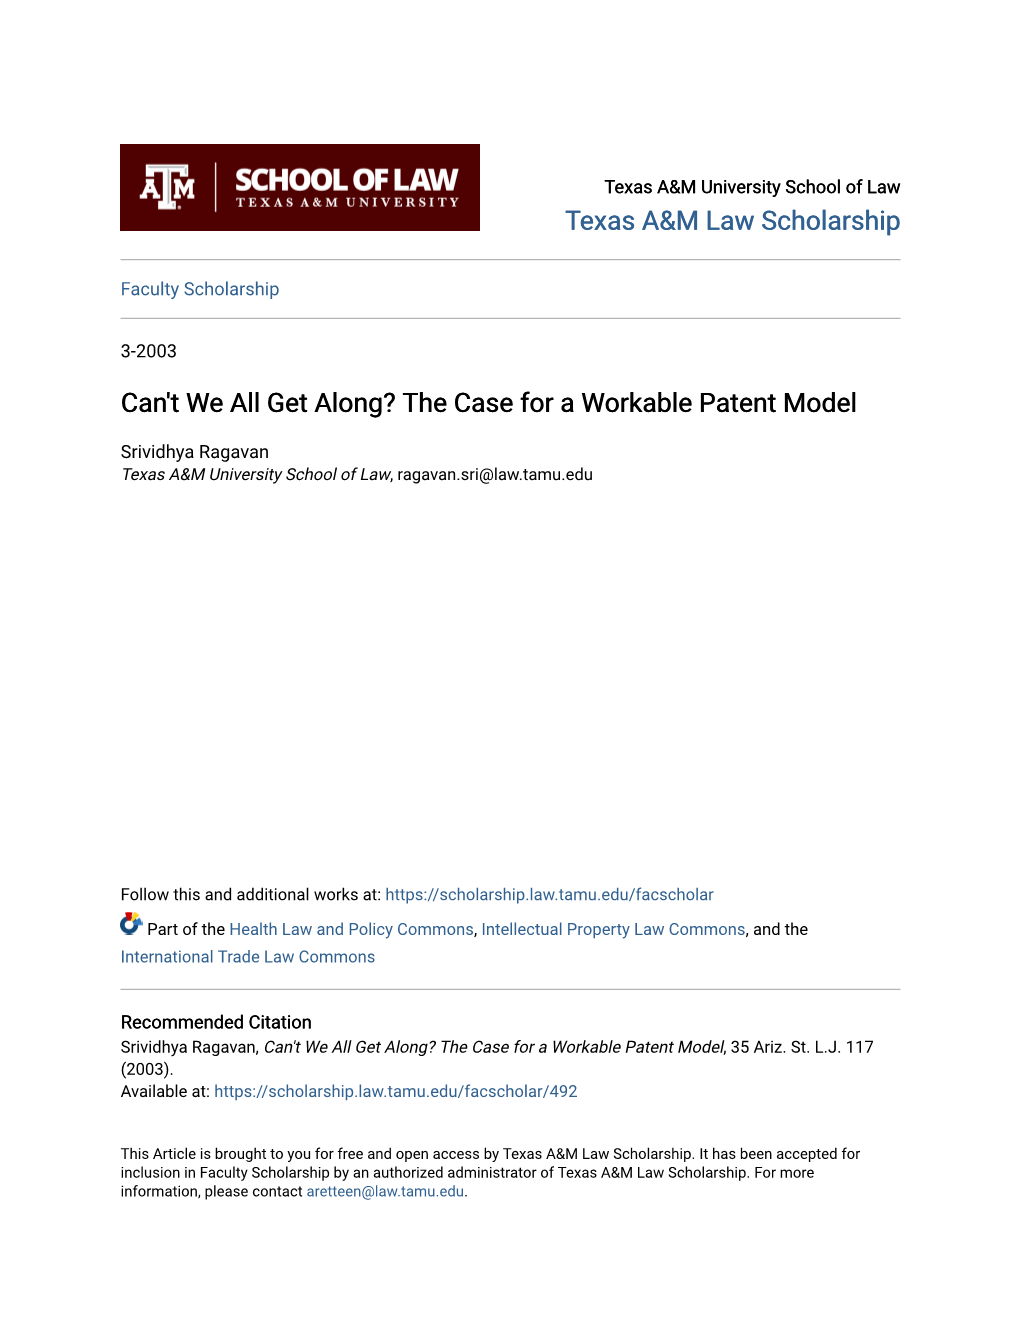 Can't We All Get Along? the Case for a Workable Patent Model